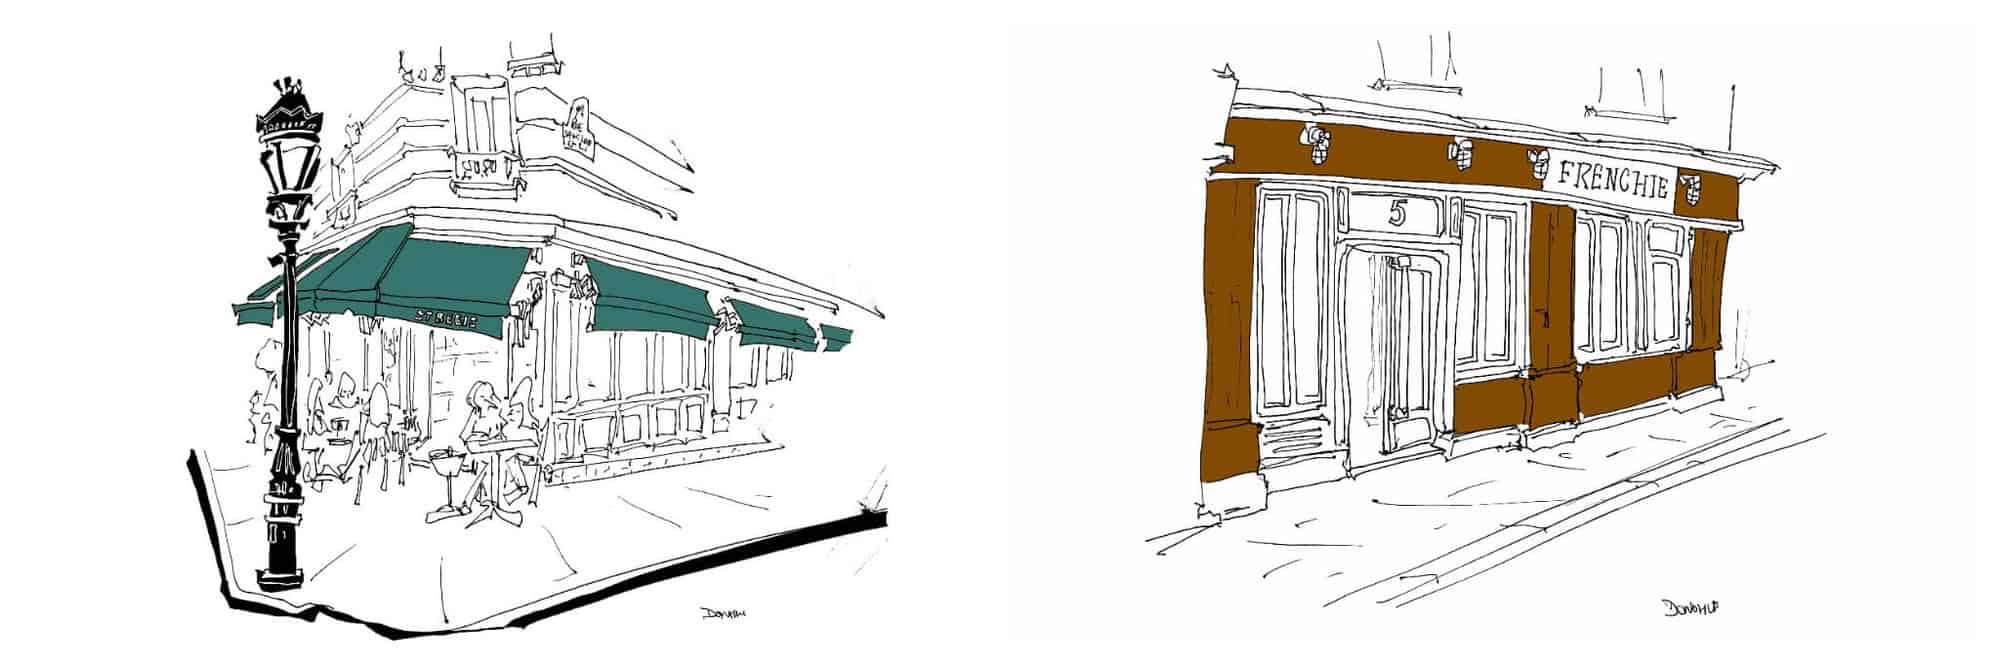 A montage of John Donohue's sketches of Parisian restaurants. On the left is a drawing of the restaurant "St. Regis" in black, white, and teal green. On the right is a drawing of the restaurant "Frenchie" in brown, black, and white.